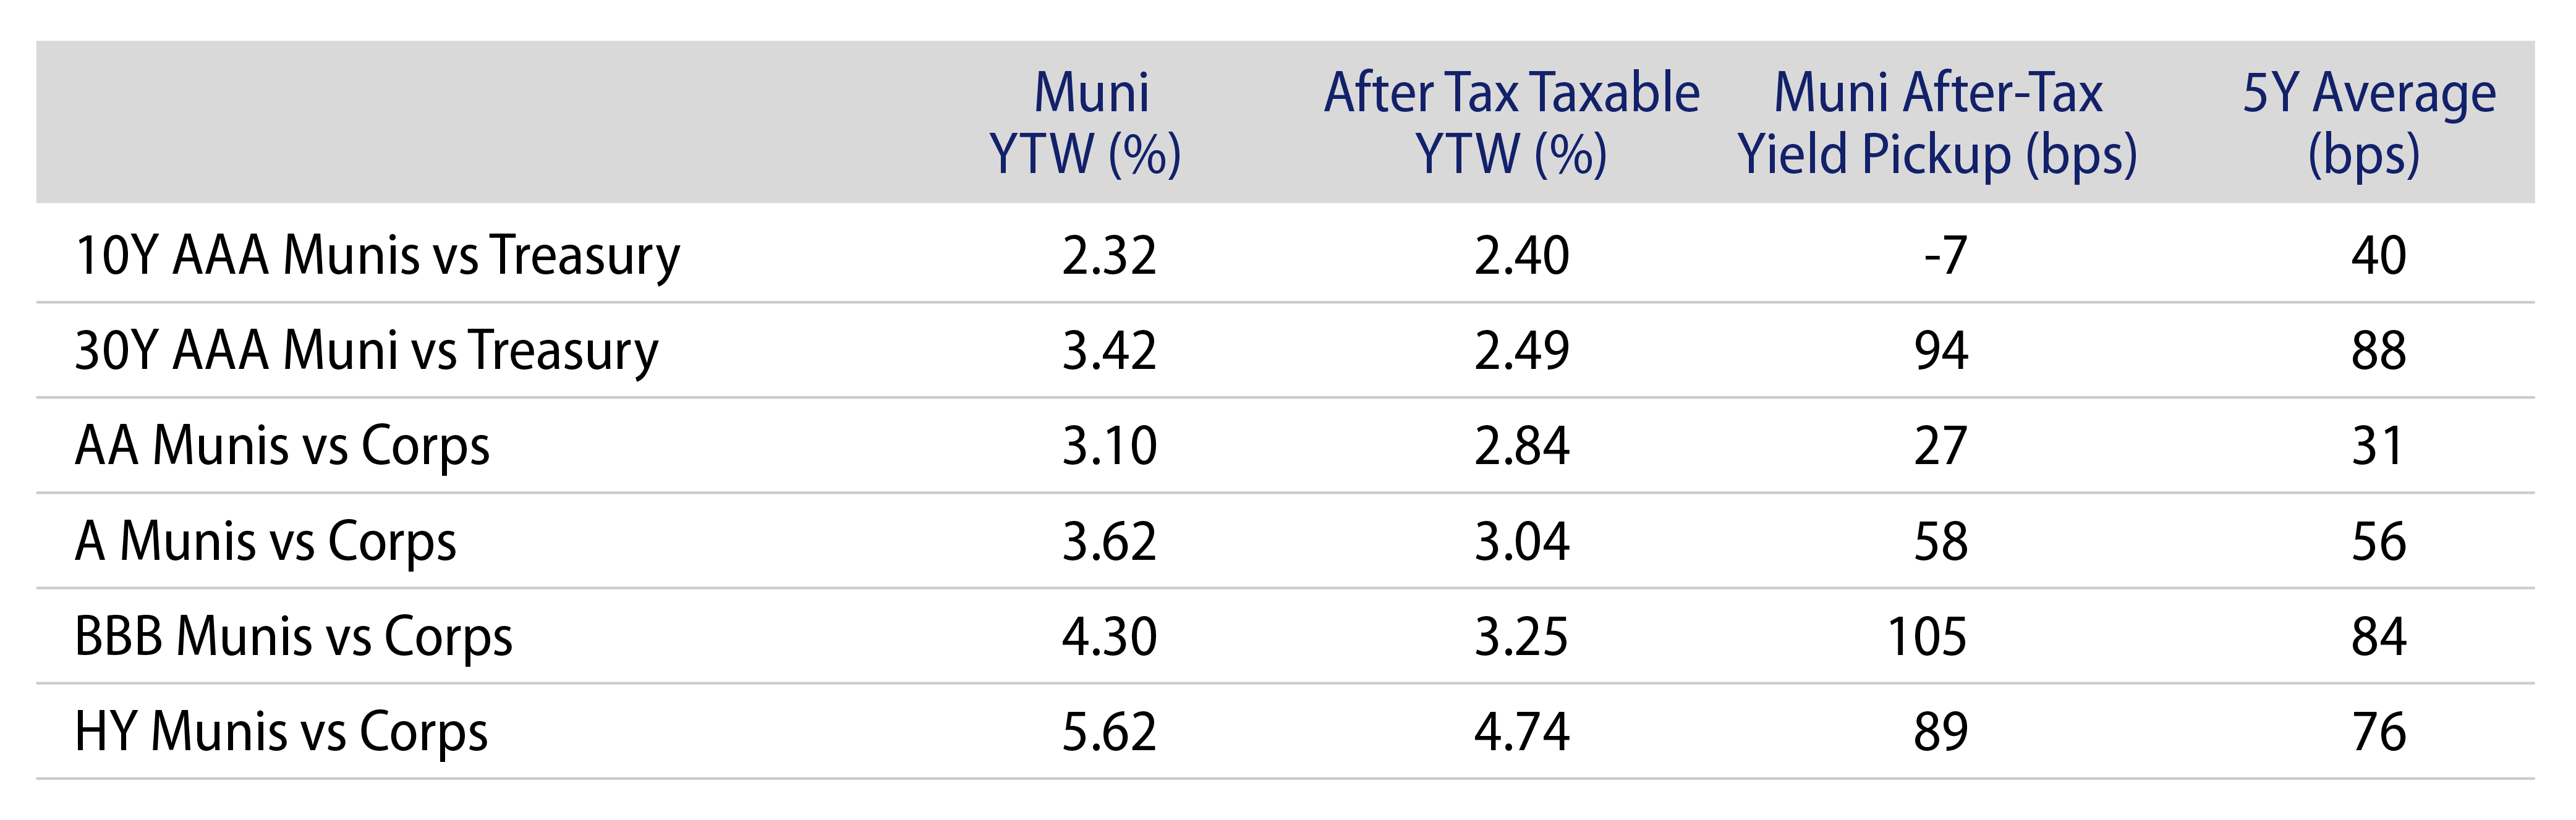 Municipal vs. Taxable Fixed-Income Yields by Quality